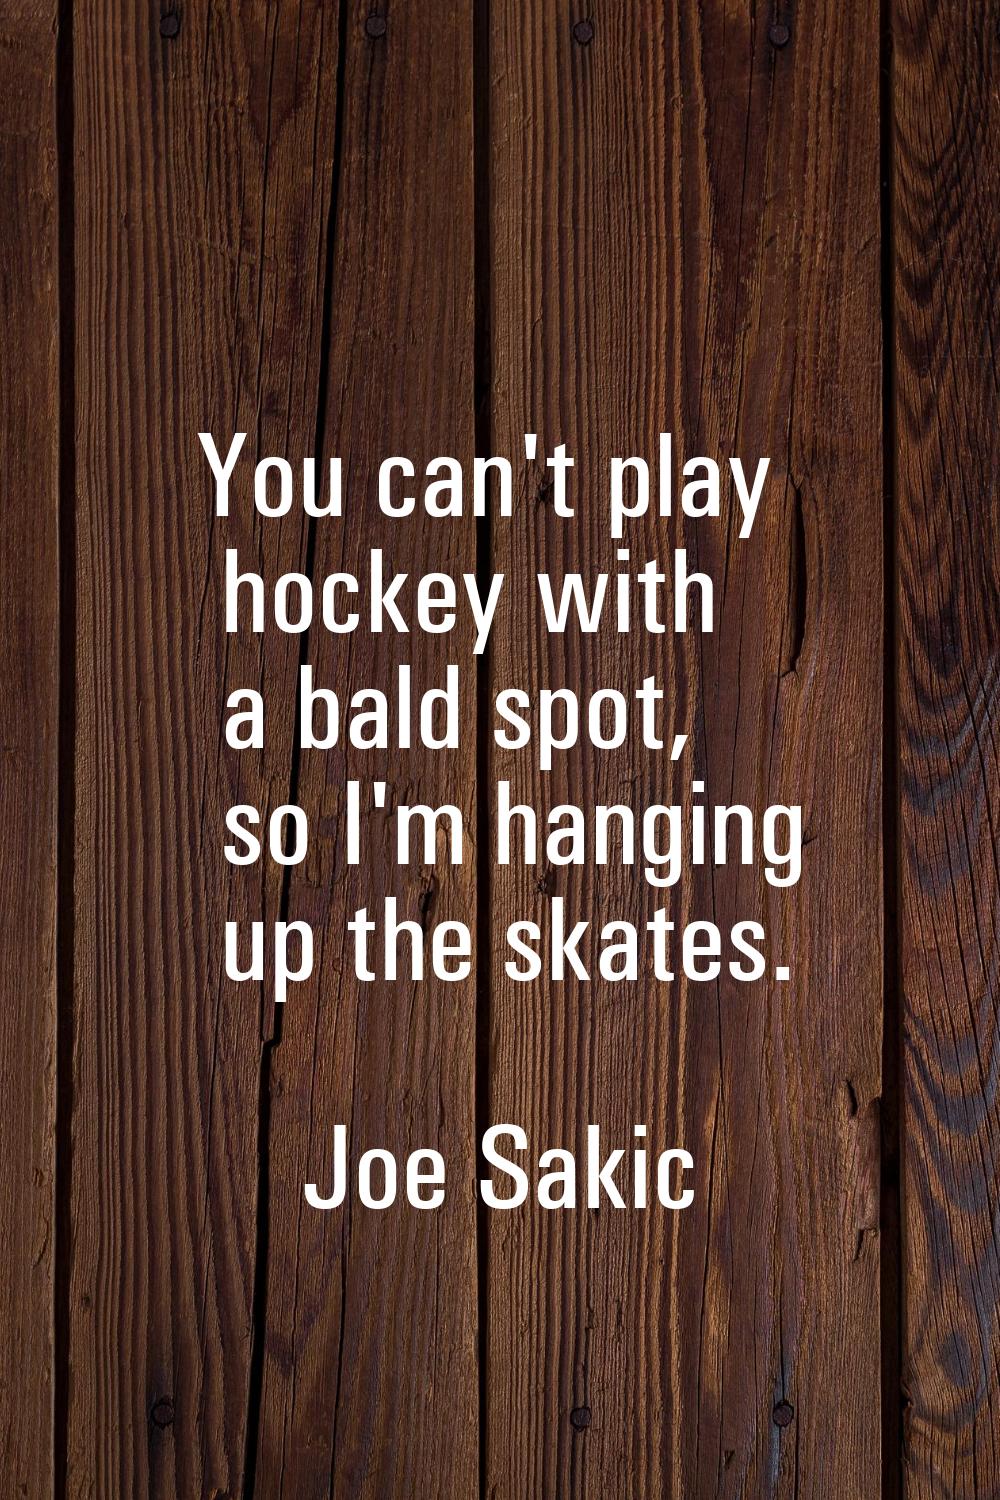 You can't play hockey with a bald spot, so I'm hanging up the skates.